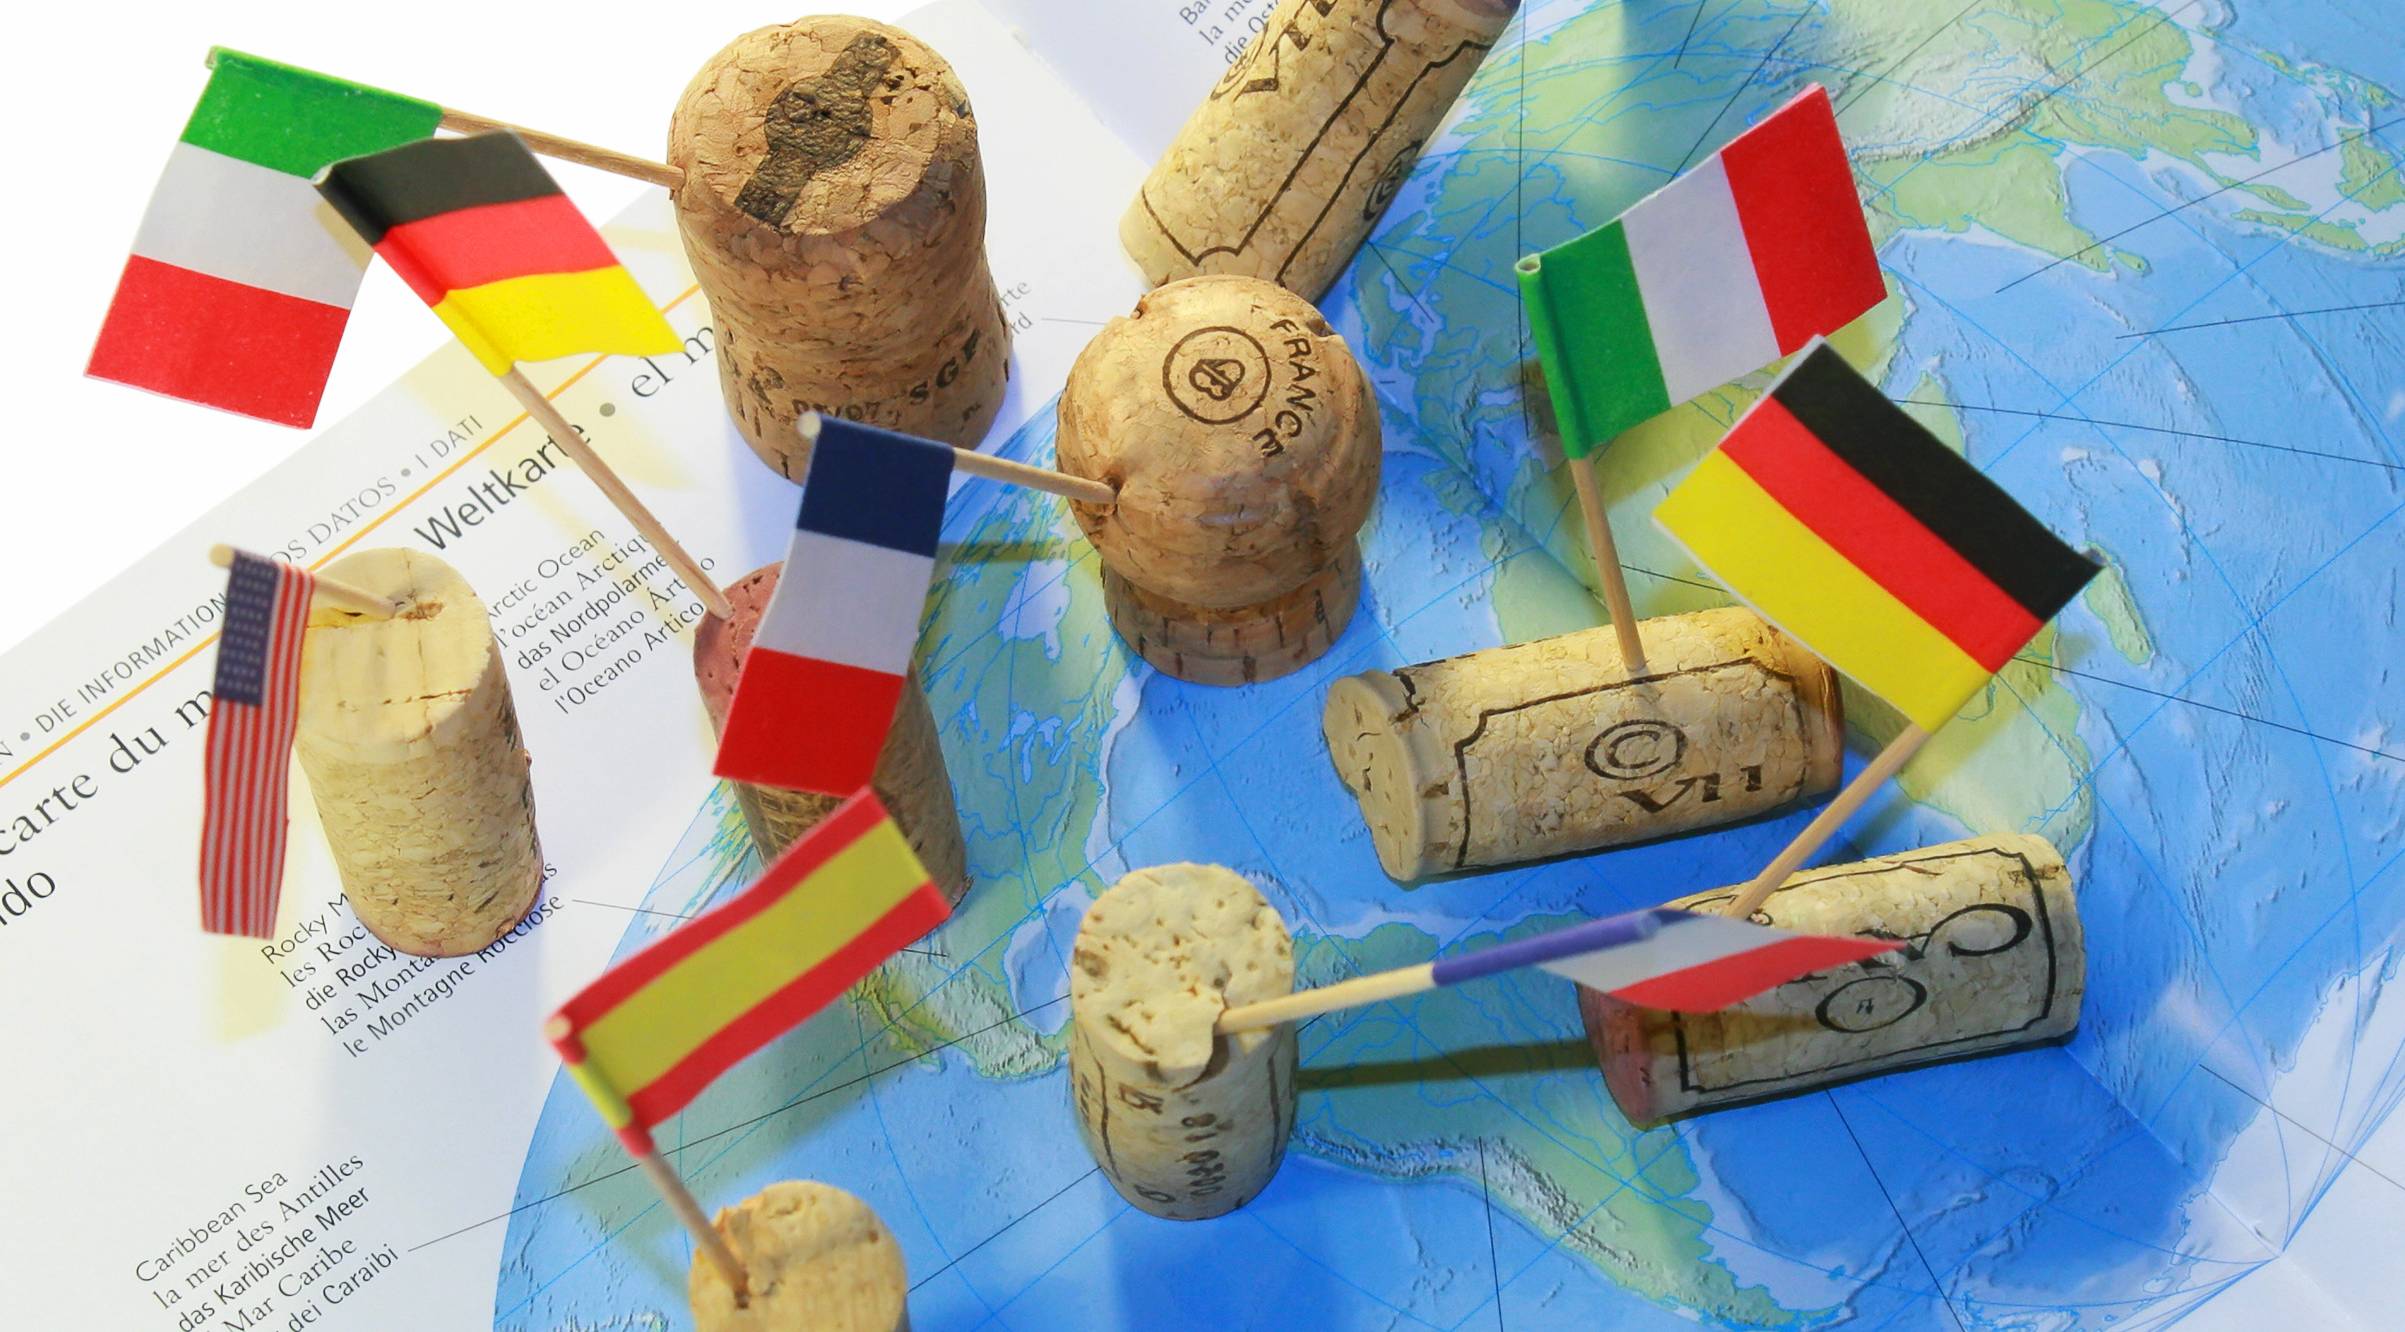 Several wine corks scattered on a world map with flags in them